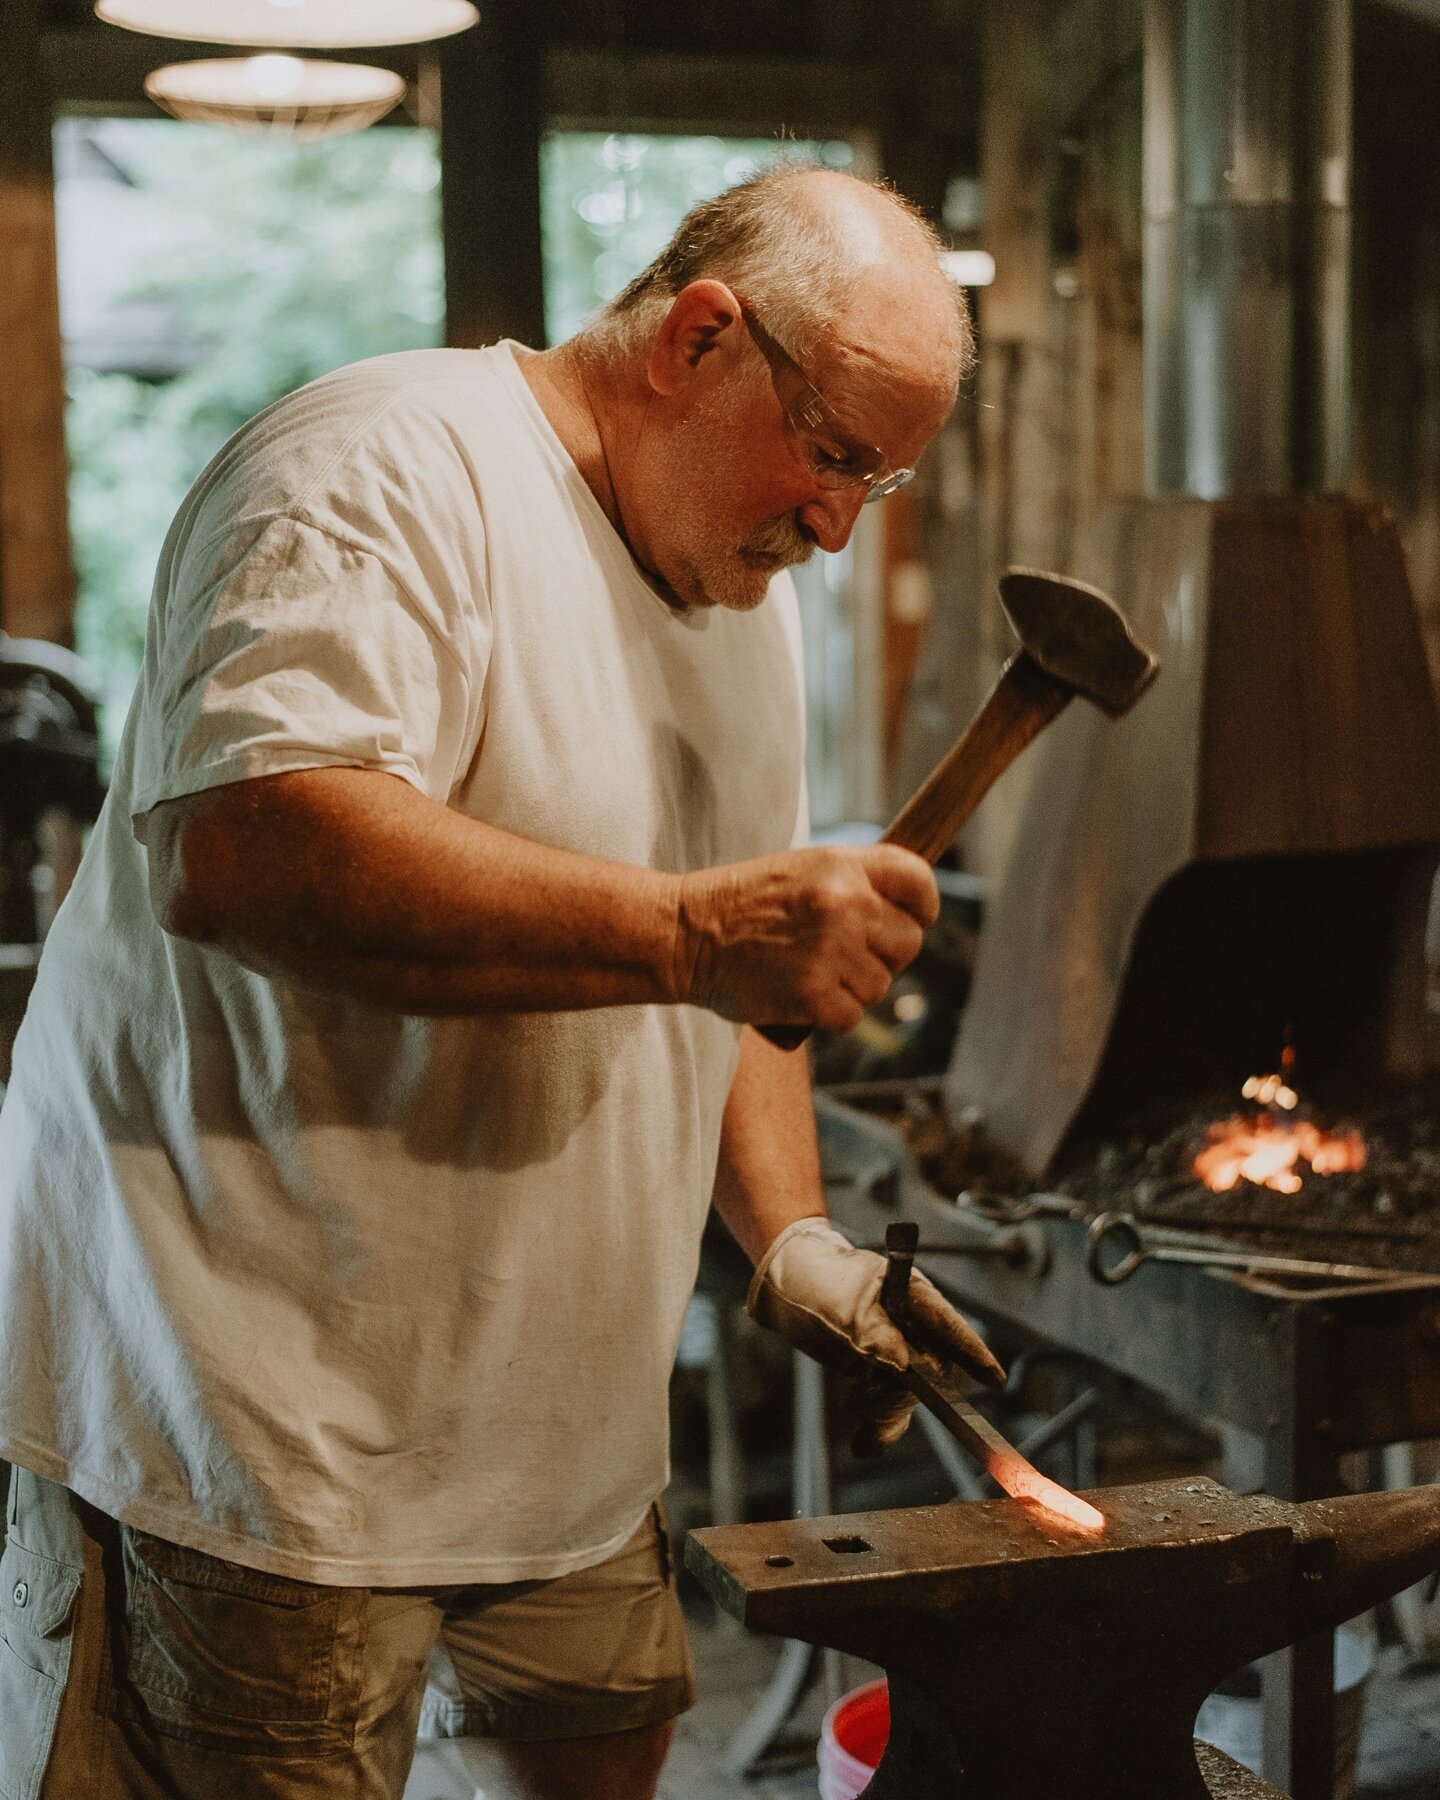 artisans and creators: Mark the blacksmith⁠
⁠
⁠
Mark Heisdorffer works with The Villages Folk School that is based in Keosauqua, IA. For more information on the classes that they offer, visit their website www.villagesfolkschool.com⁠
⁠
#villagesofvan